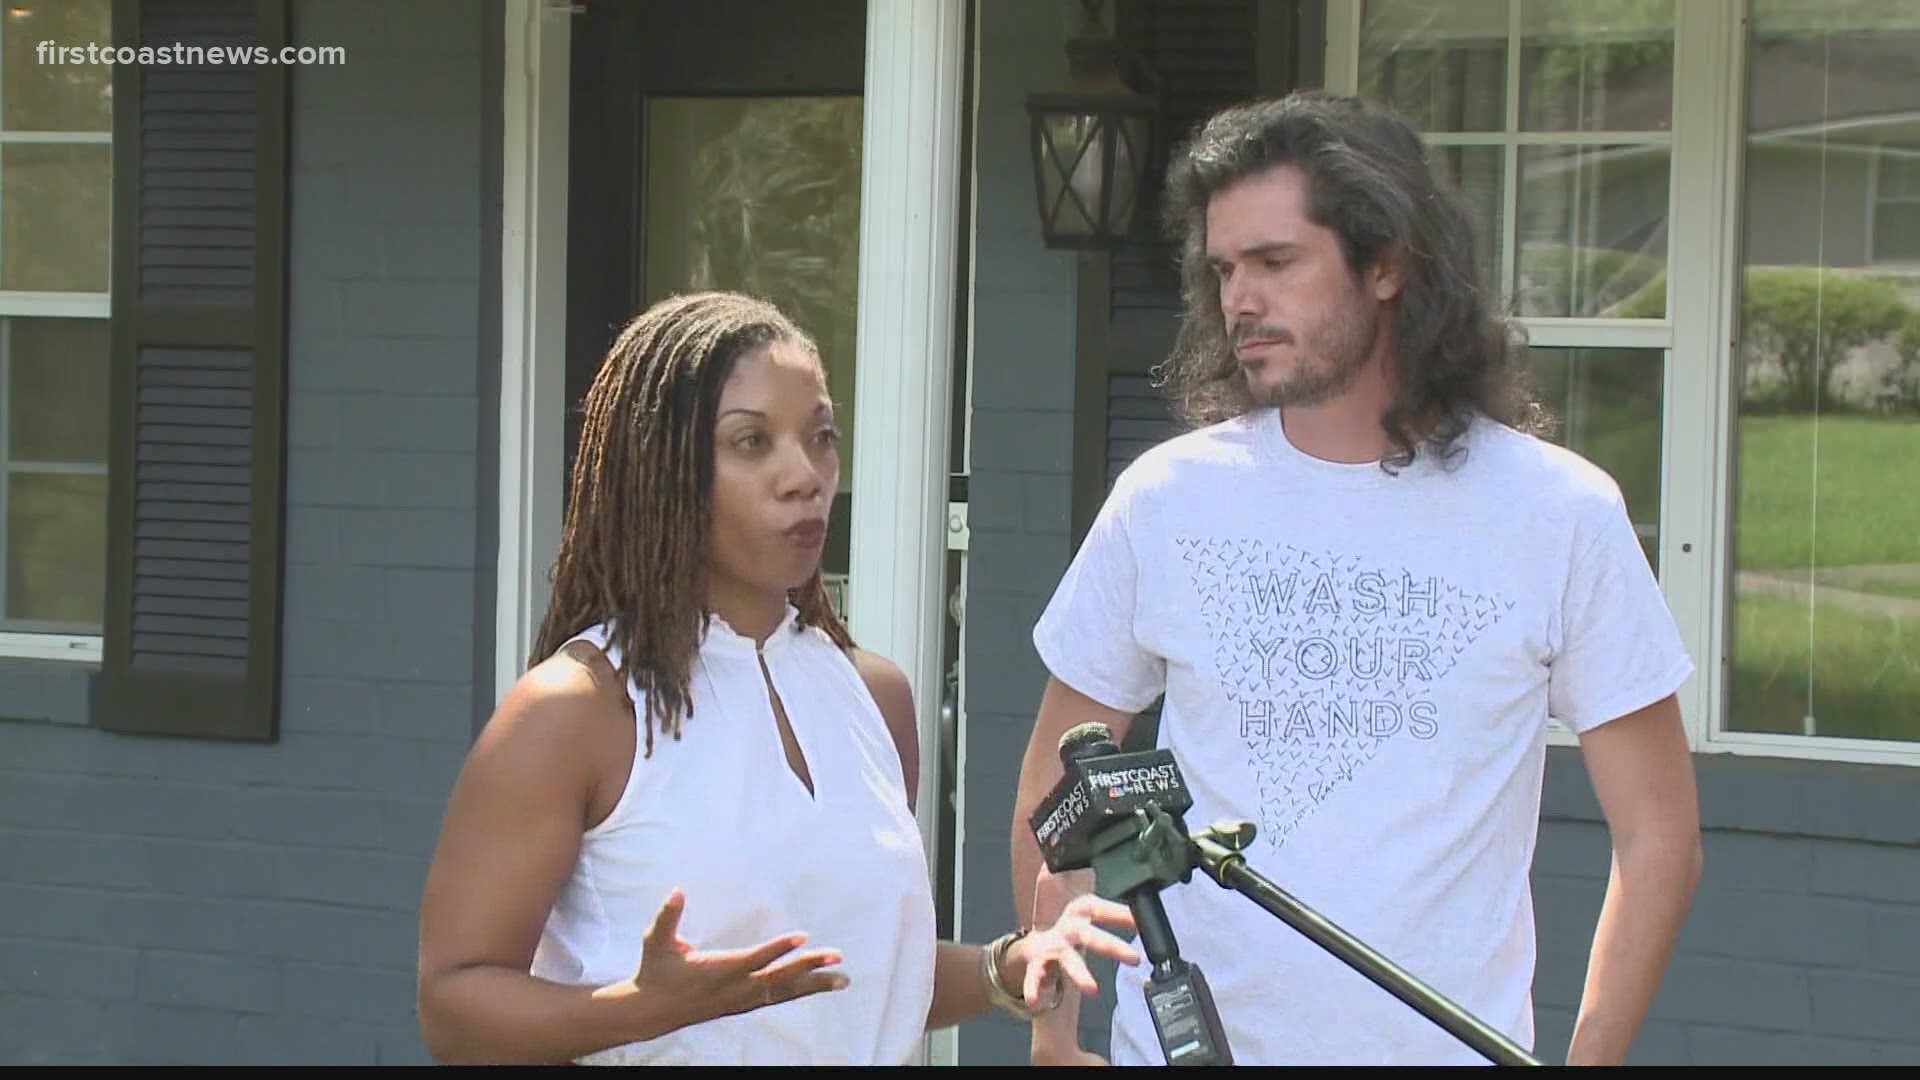 Jacksonville, Florida couple sees home appraisal jump 40 percent after they remove all traces of “Blackness”